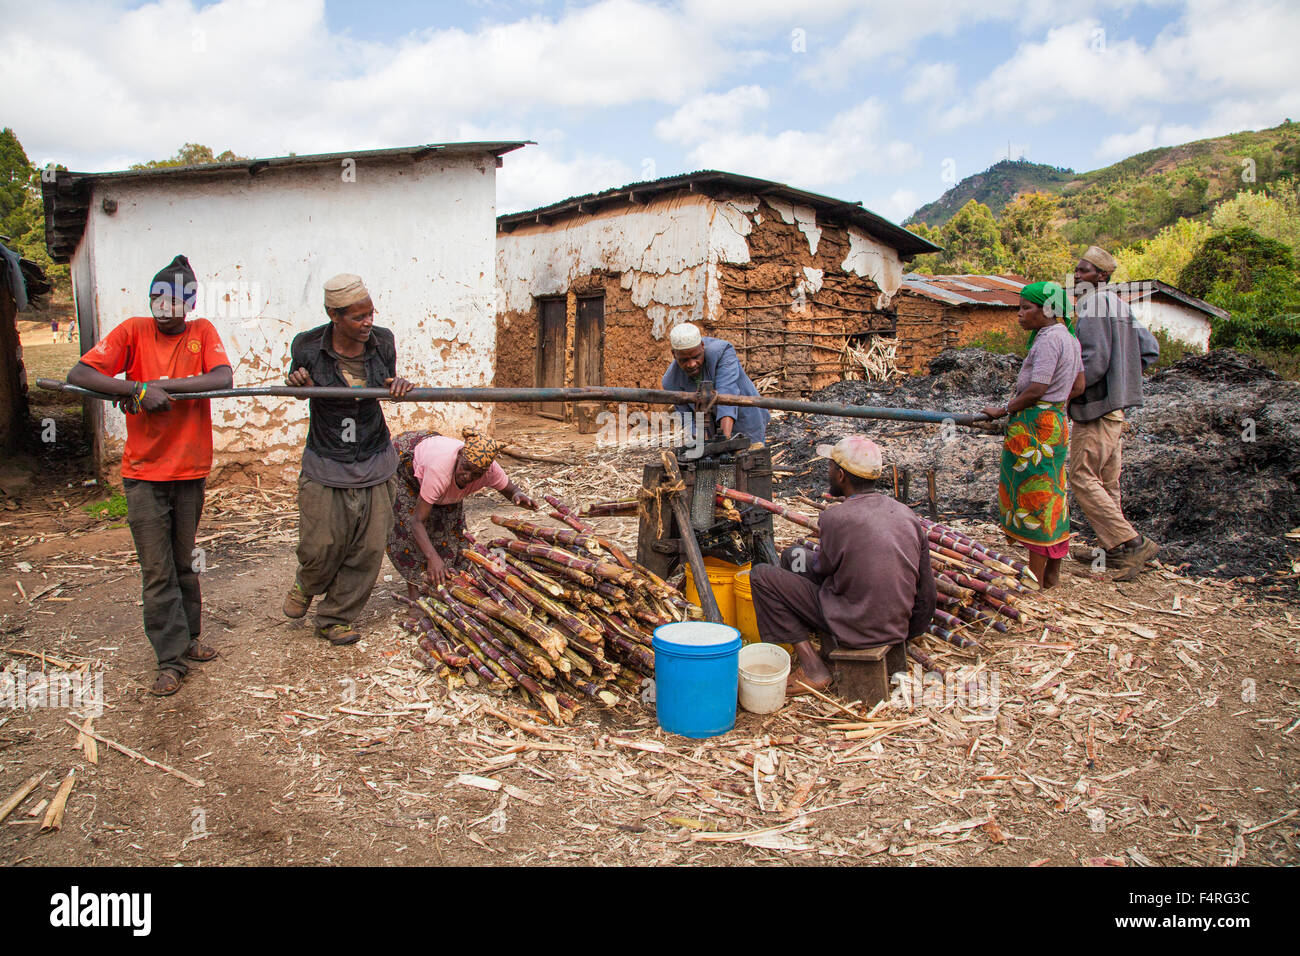 Africa, village, house, home, houses, homes, people, persons, travel, Tanzania, Usambara, sugarcane, work Stock Photo